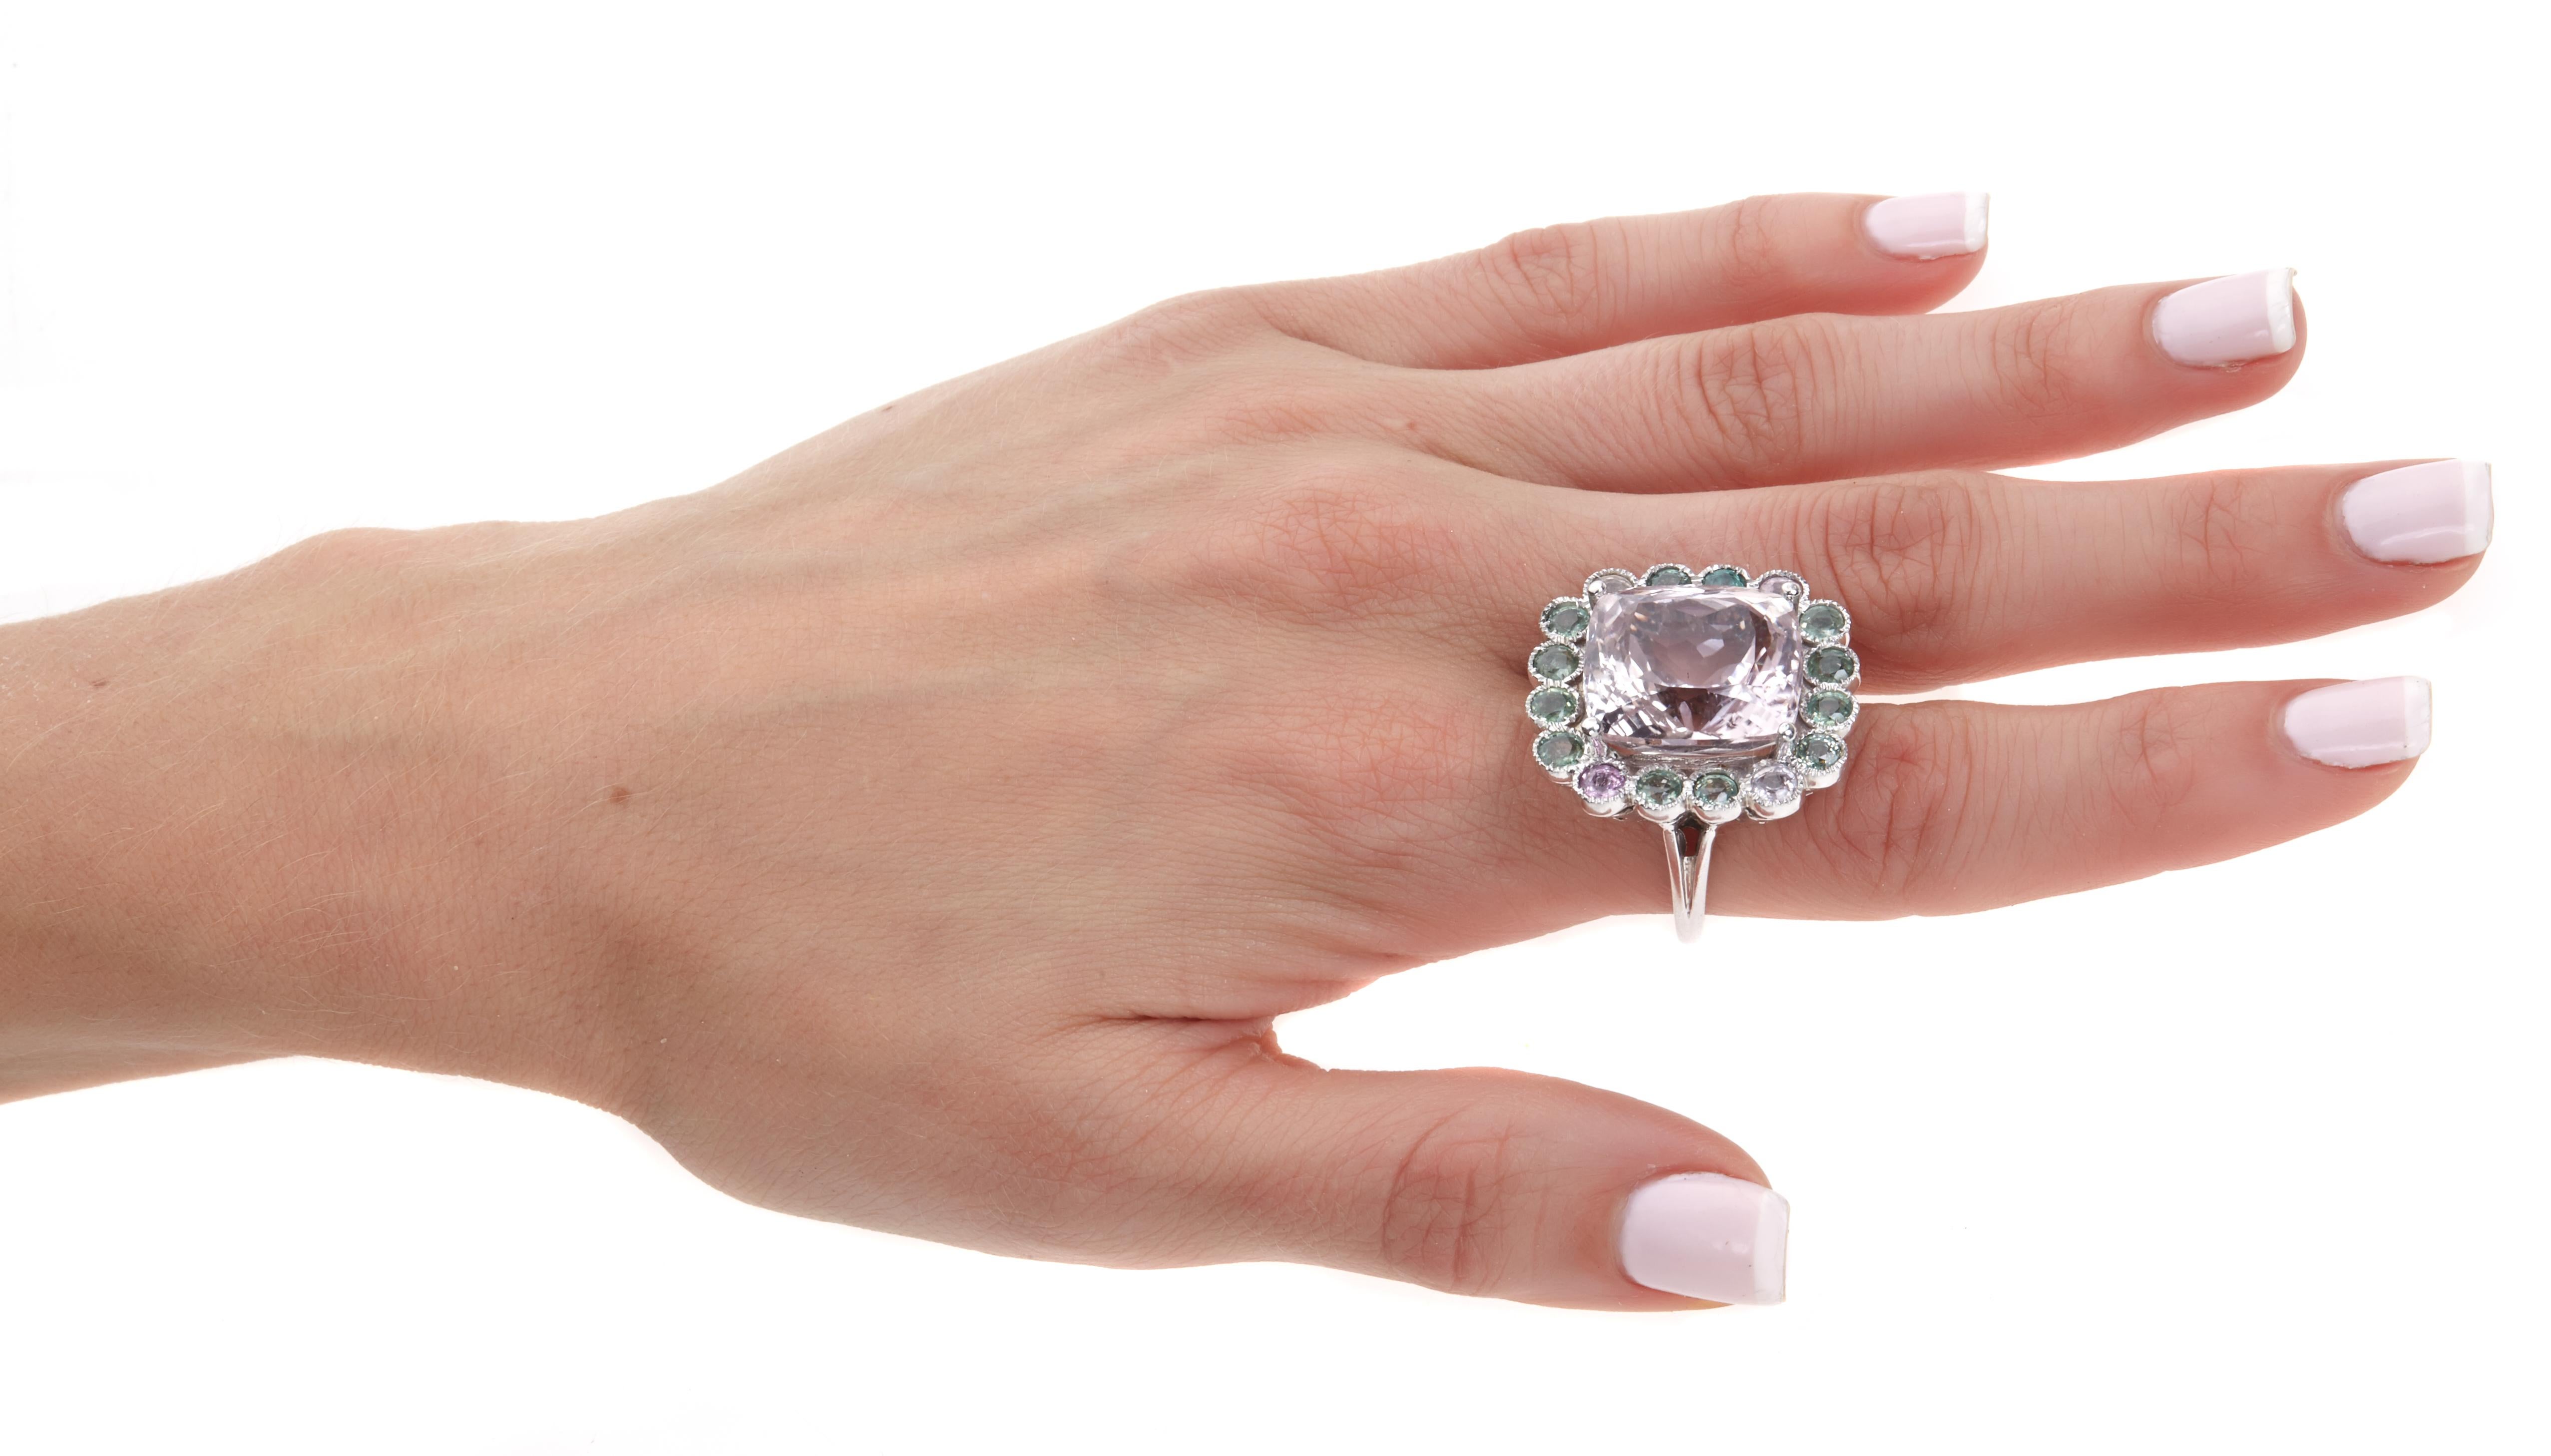 Sabrina Balsky Jewelry
One Of a Kind Unheated Kunzite Cocktail ring surrounded with Pink and Green Sapphires and Millgraining Detail around Sapphires set in Rhodium Plated 10K White Gold.  Shank has signature detailing.